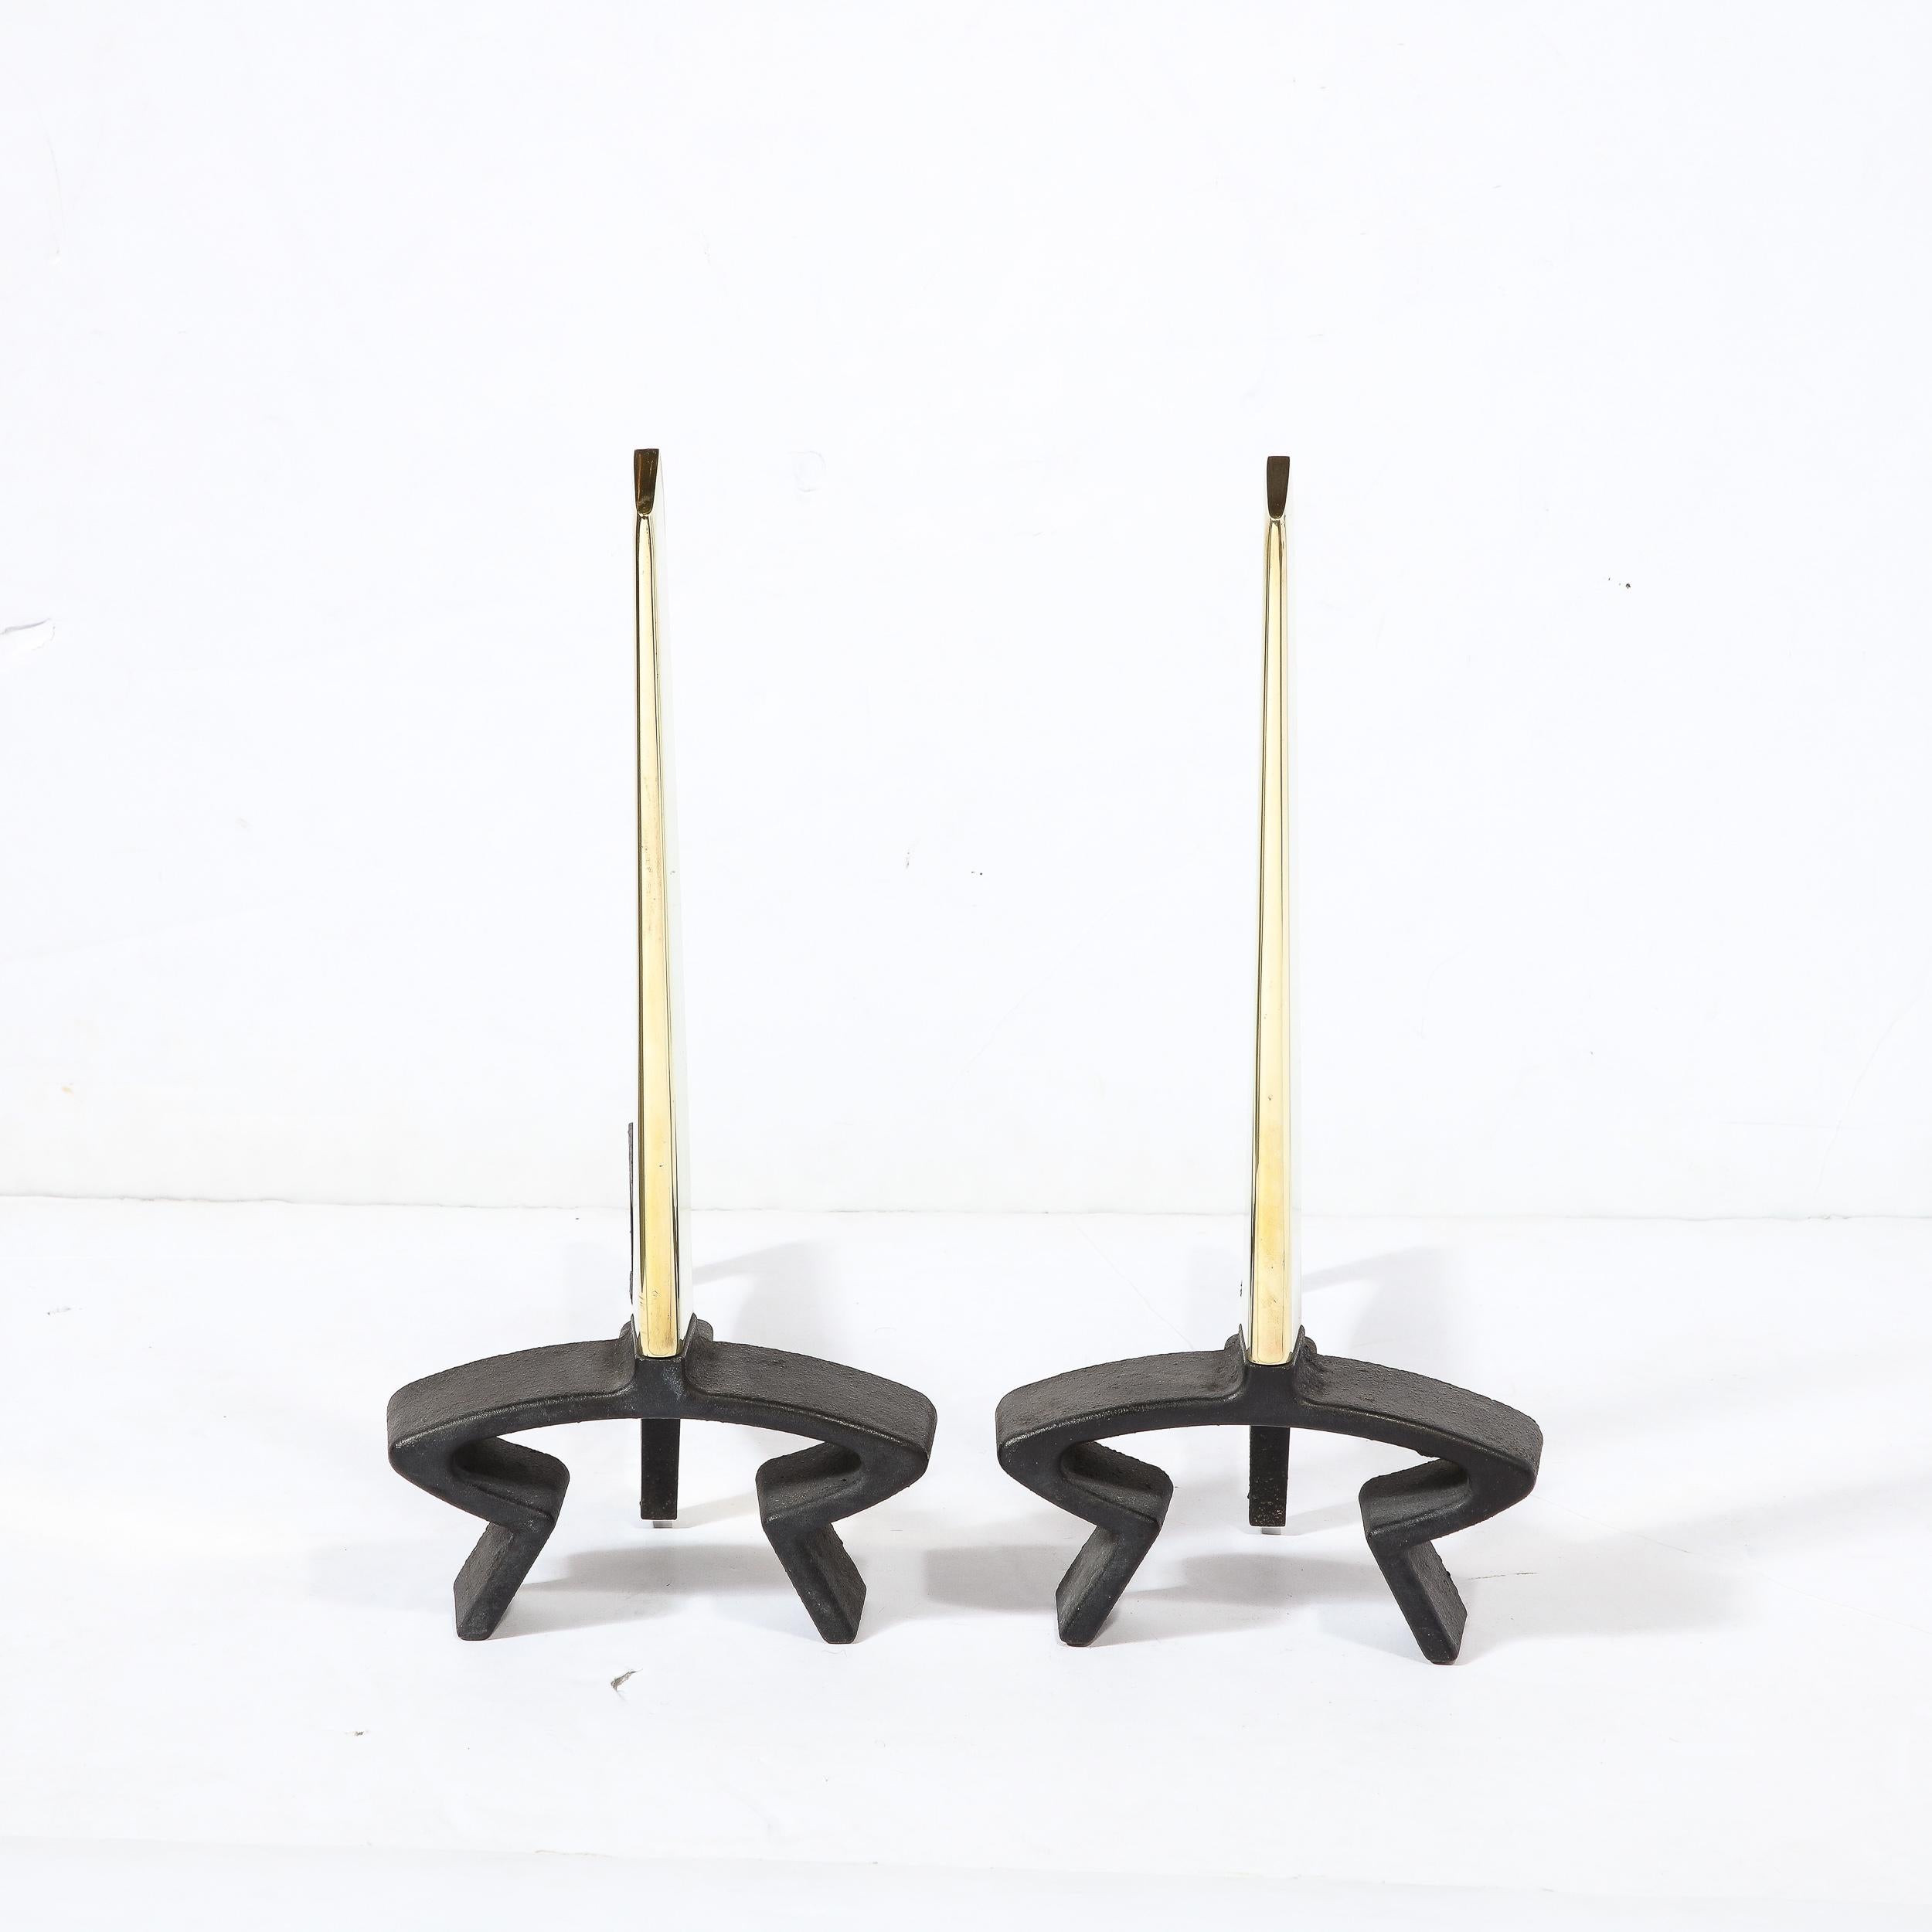 American Mid-Century Modern Brass & Black Cast Iron Andirons, by Donald Desky for Bennett For Sale